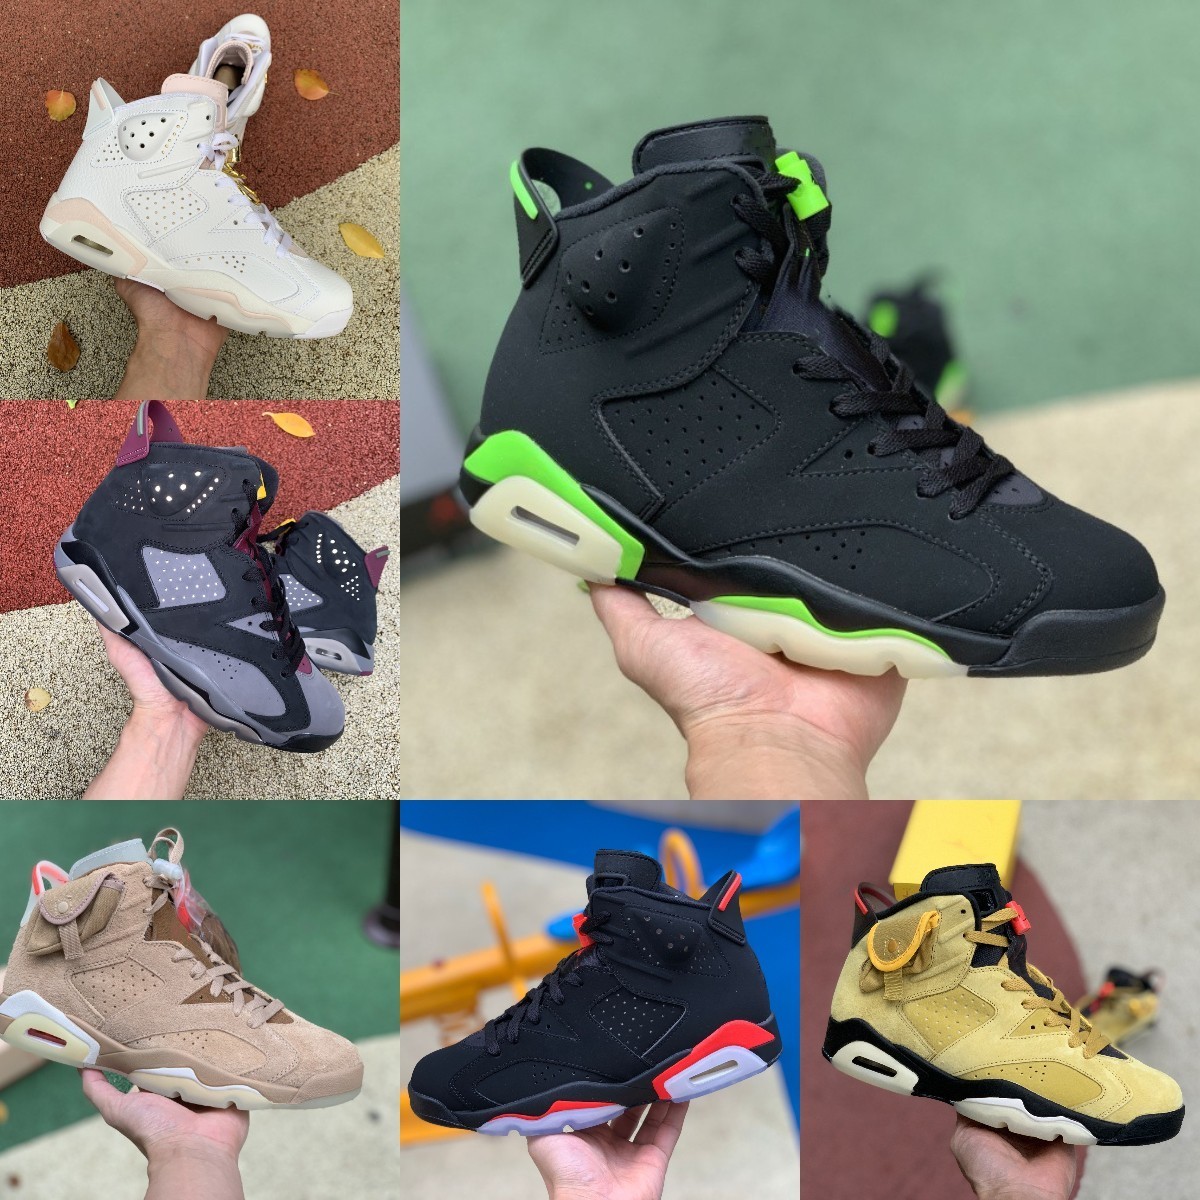 

2022 New High Quality Hot Jumpman 6 DMP Carmine Men Basketball Shoes Black Infrared Oregon Ducks Pe 6s Trainers Mens Sports Sneakers With Box Designer Coach, Shua